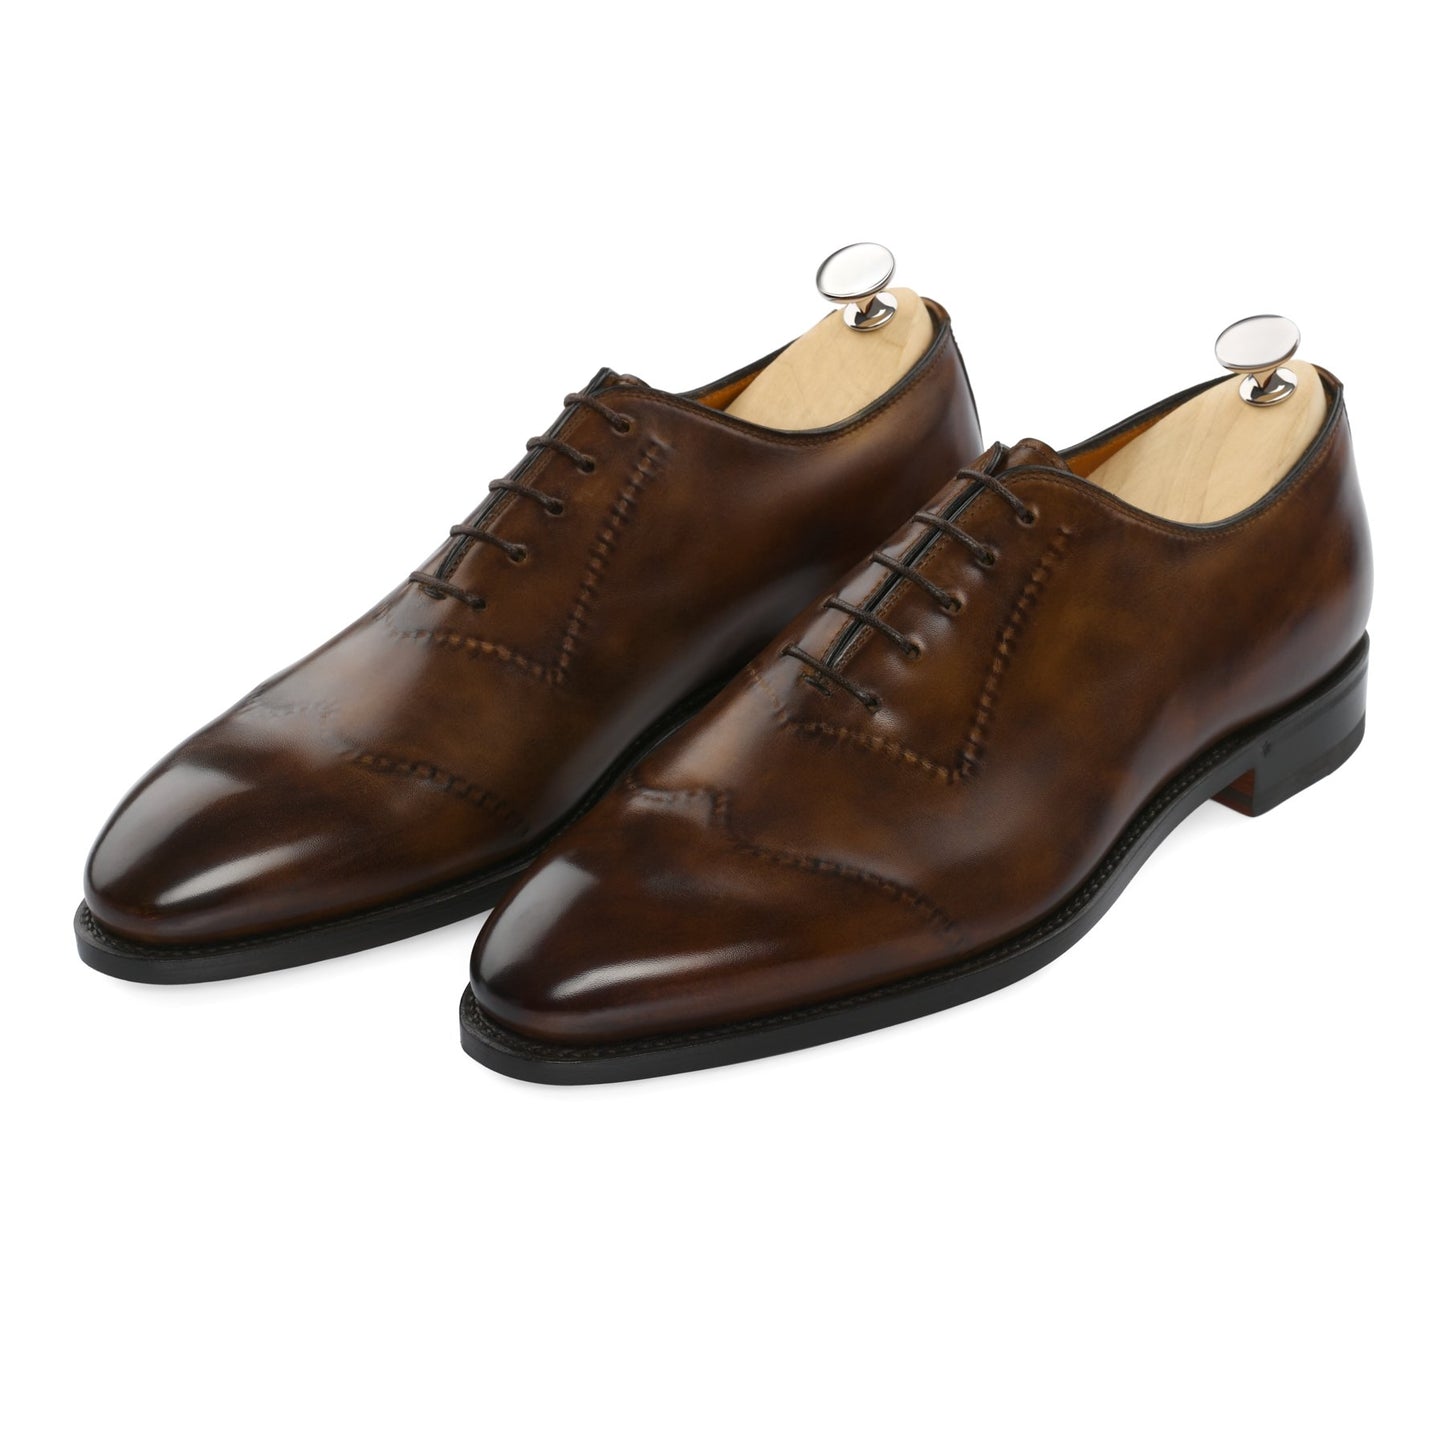 Bontoni "Vittorio II" Five-Eyelet Oxford with Hand-Stitched Reversed Details - SARTALE